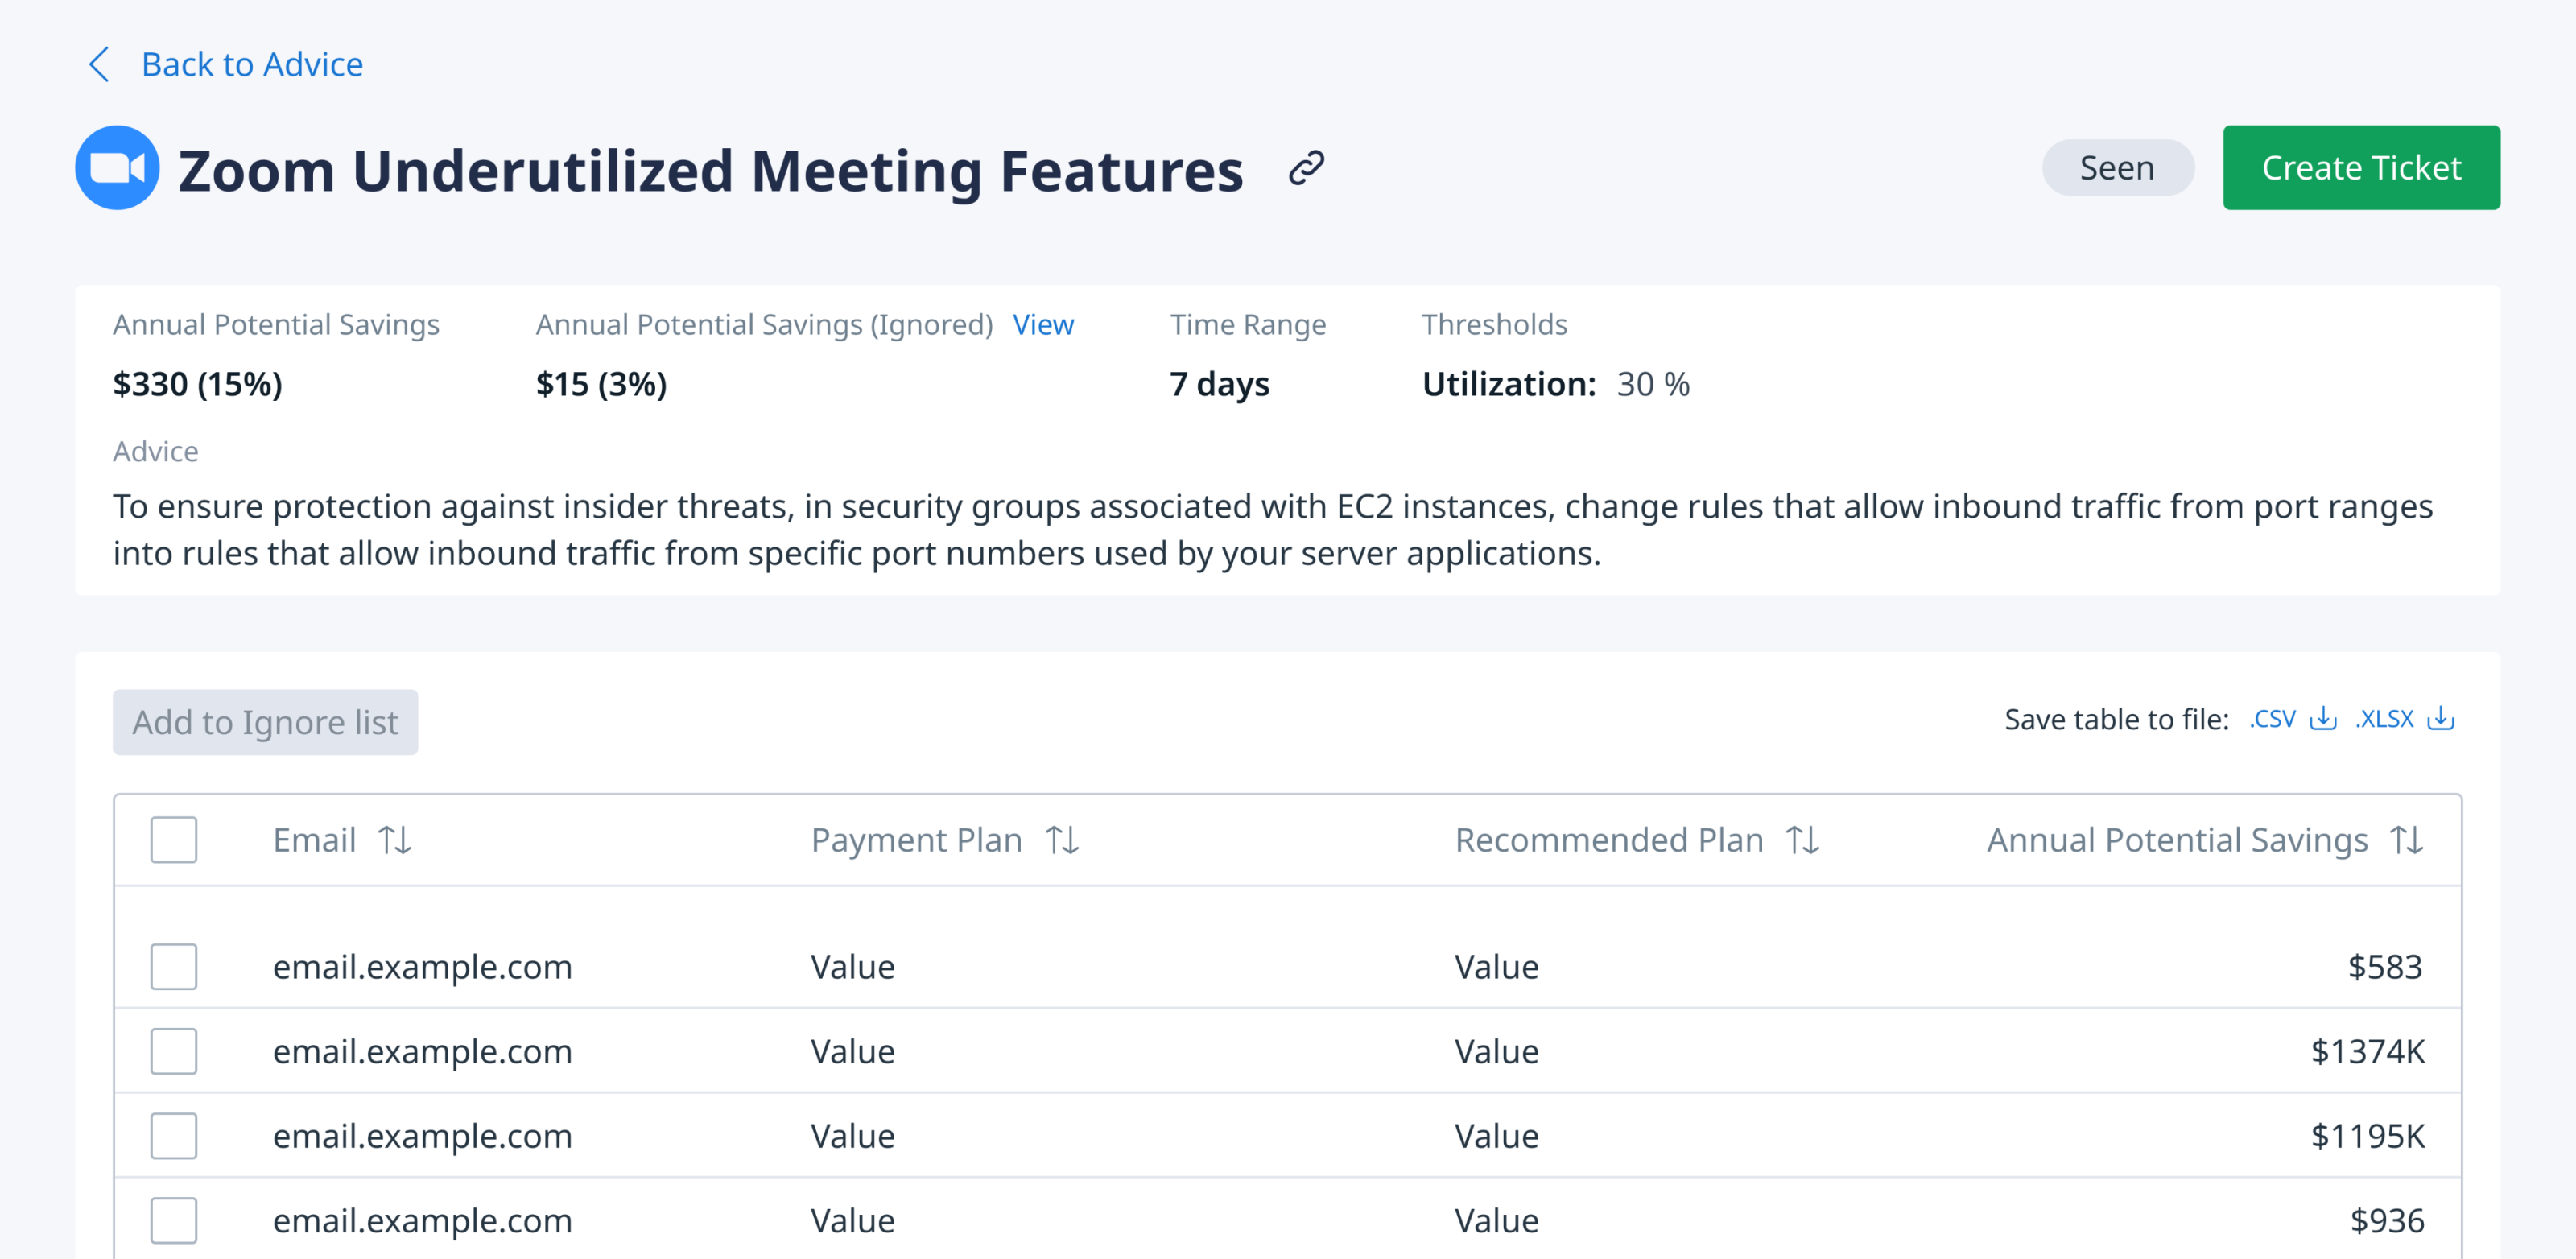 New Binadox Advice - Zoom Underutilized Meeting Features